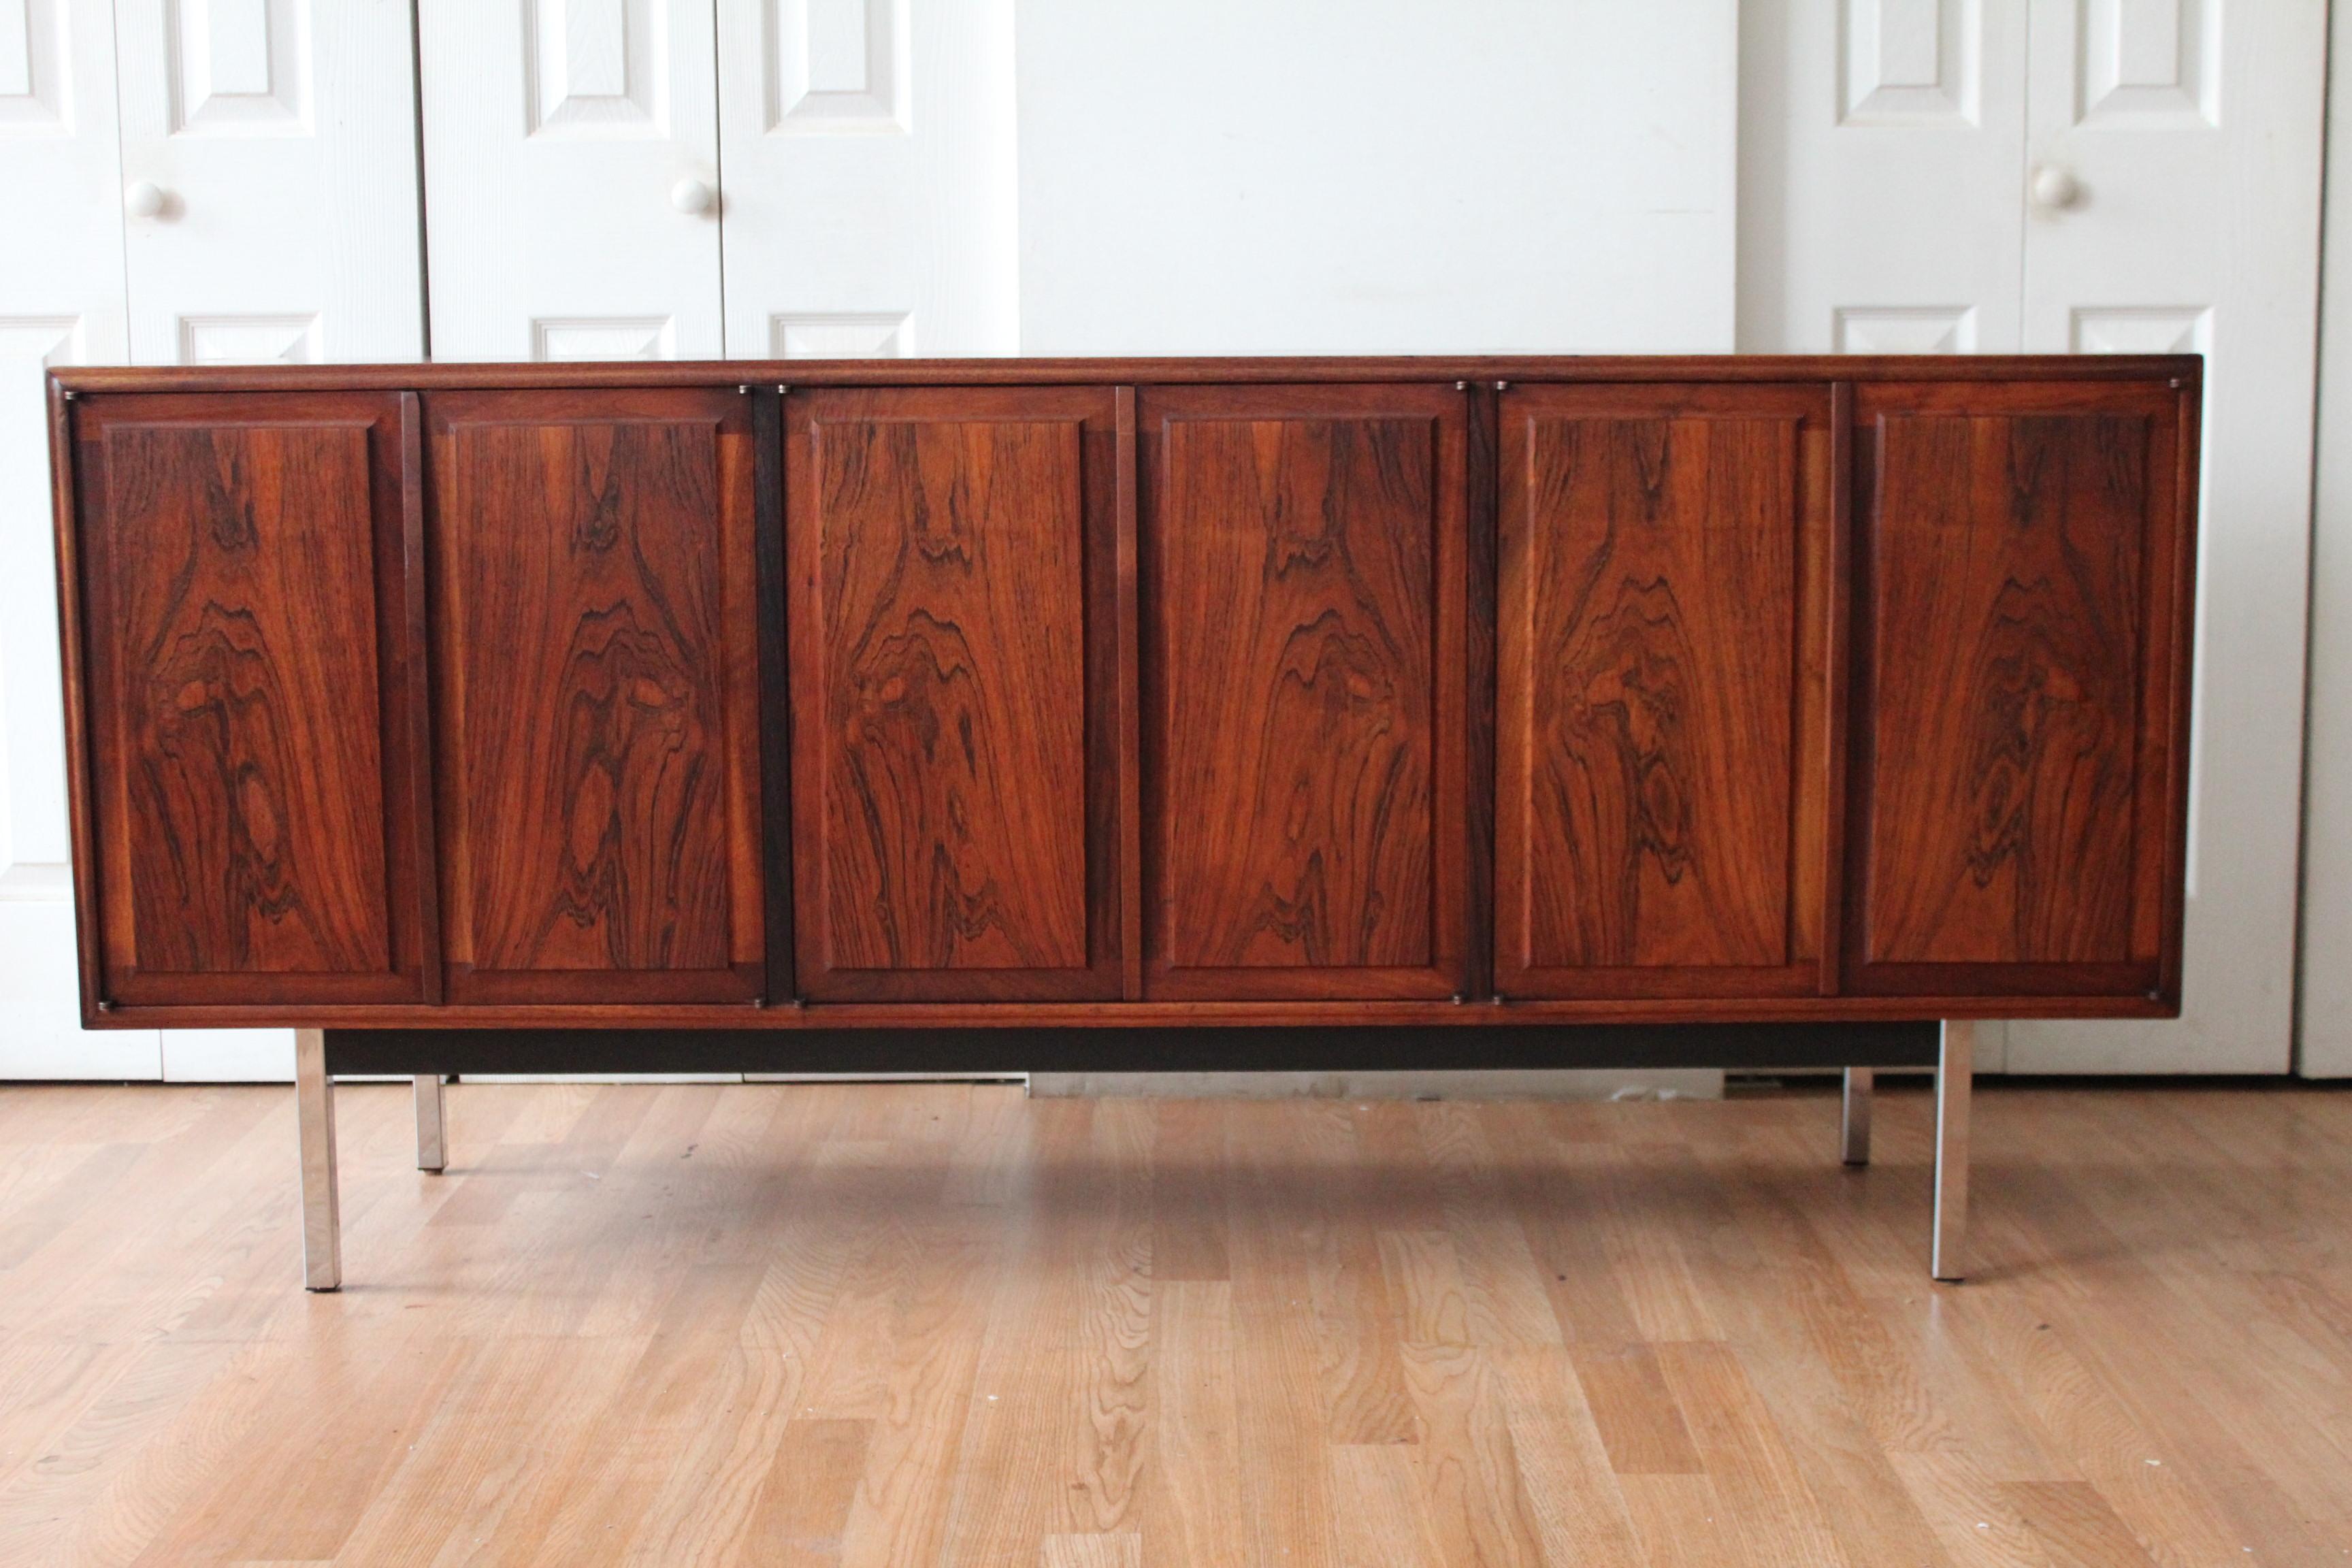 Jack Cartwright for Founders Rosewood Credenza. 3 sets of double doors, three dove-tailed pull out drawers with ample storage beneath. Case sits on squared chrome legs. Original finish. Exquisite.